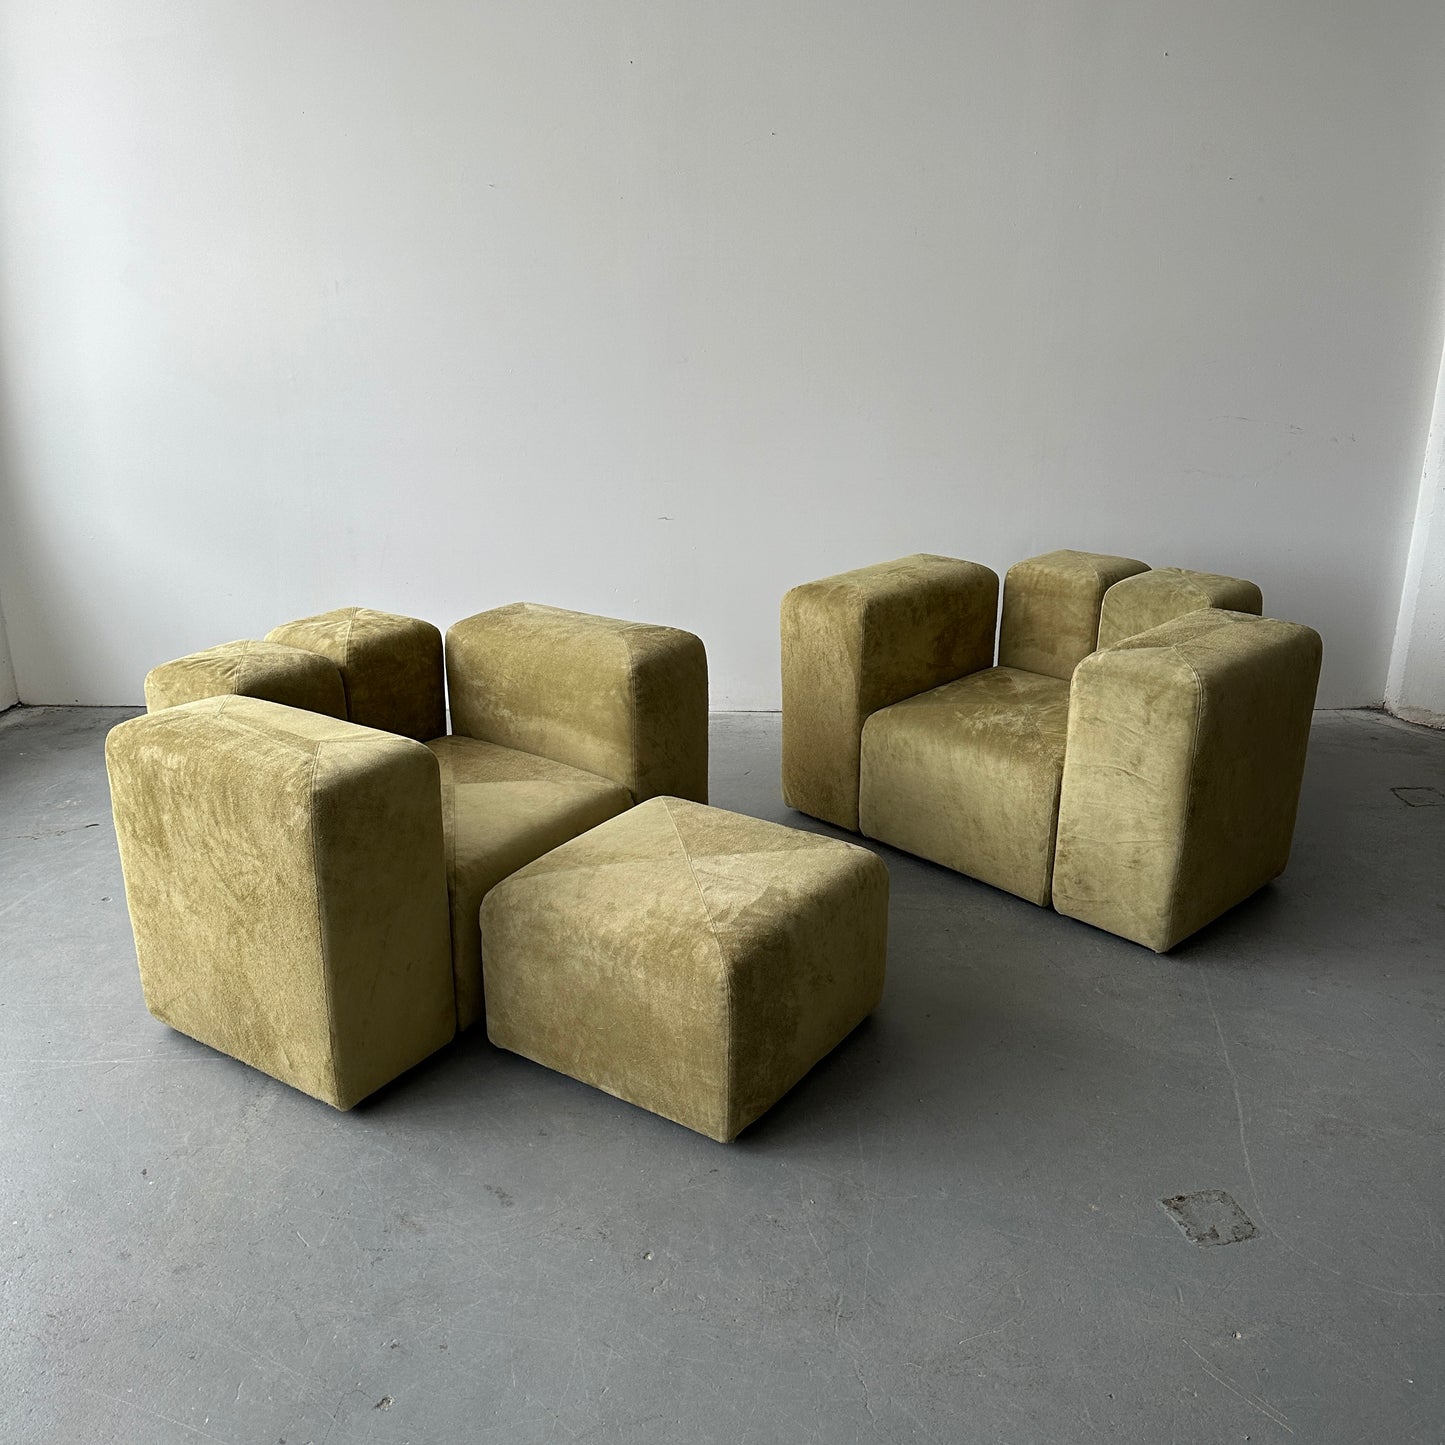 Giancarlo Piretti “Sistema 61” Lounge Chairs & Ottoman in Holly Hunt Suede